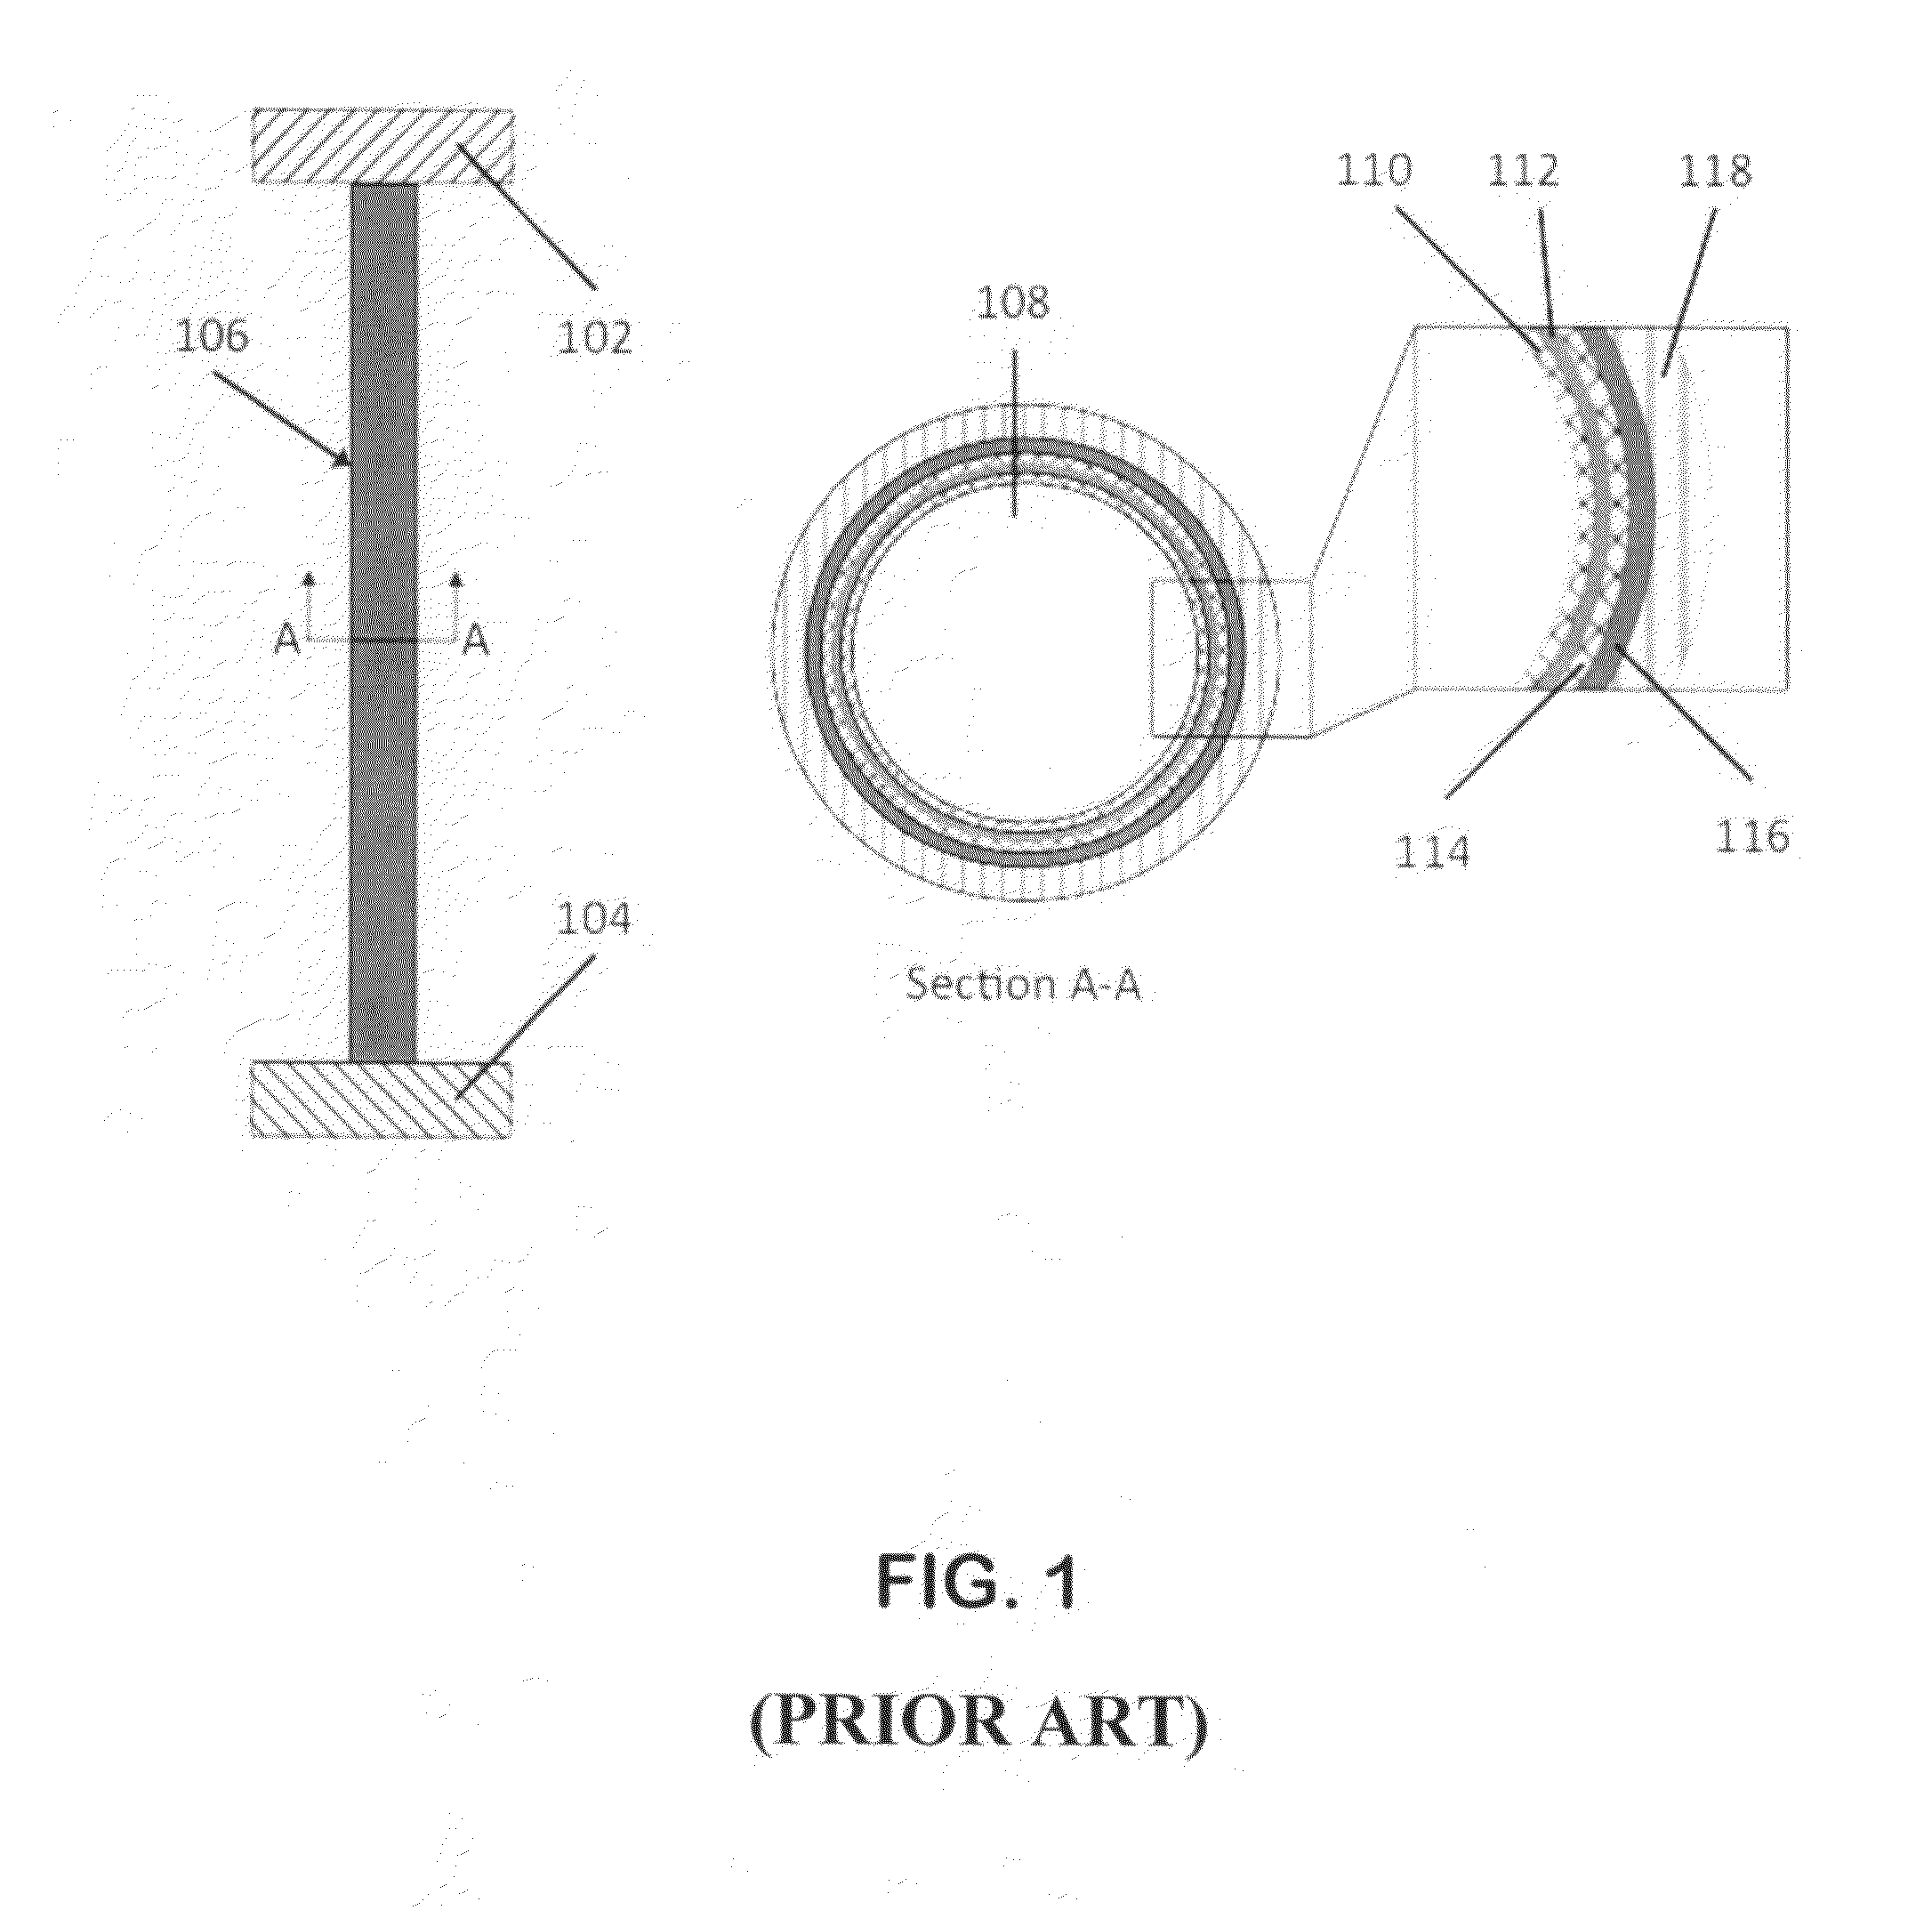 Method of both cooling and maintaining the uniform temperature of an extended object